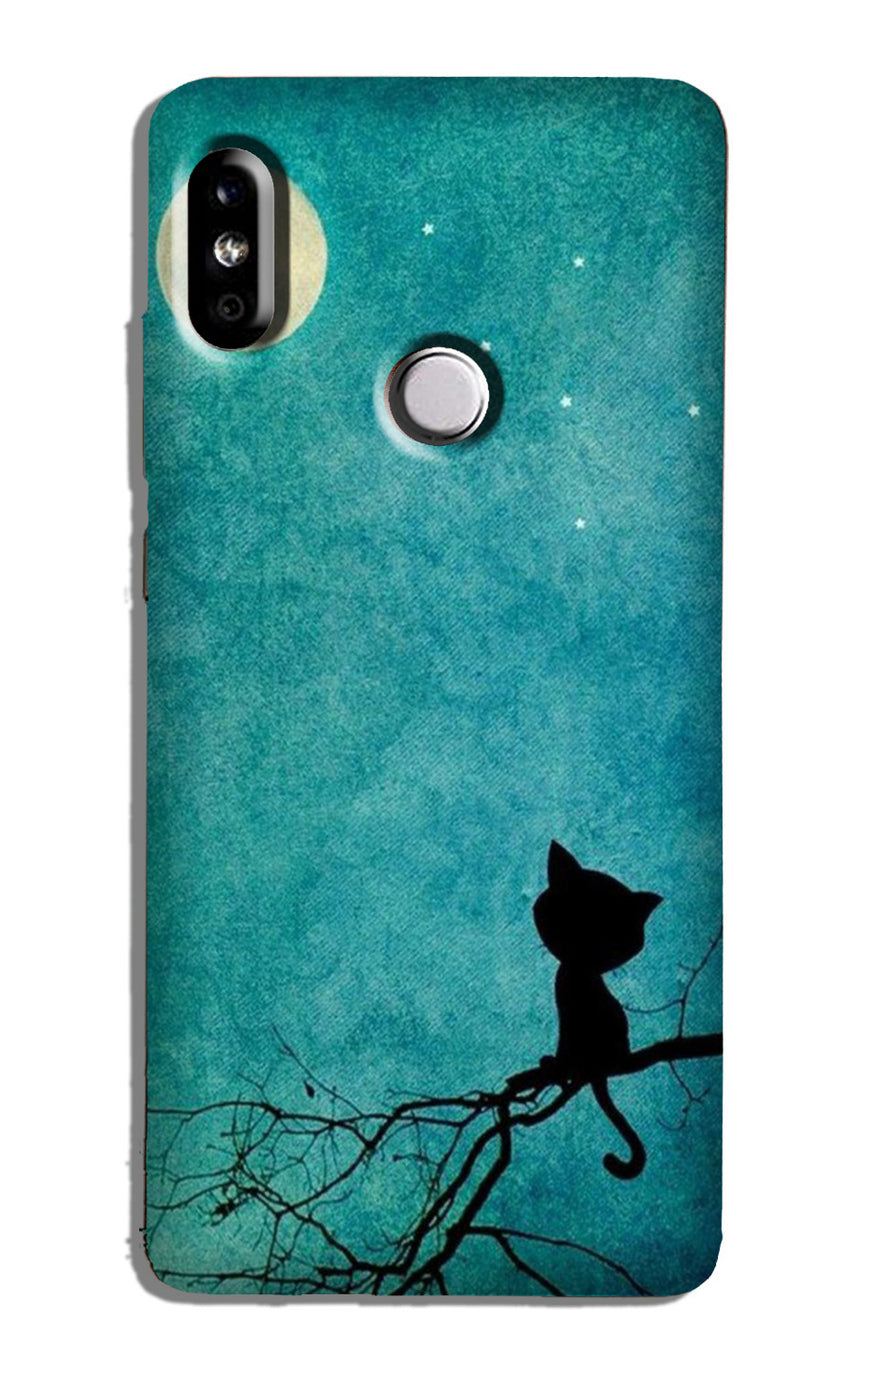 Moon cat Case for Redmi Note 6 Pro